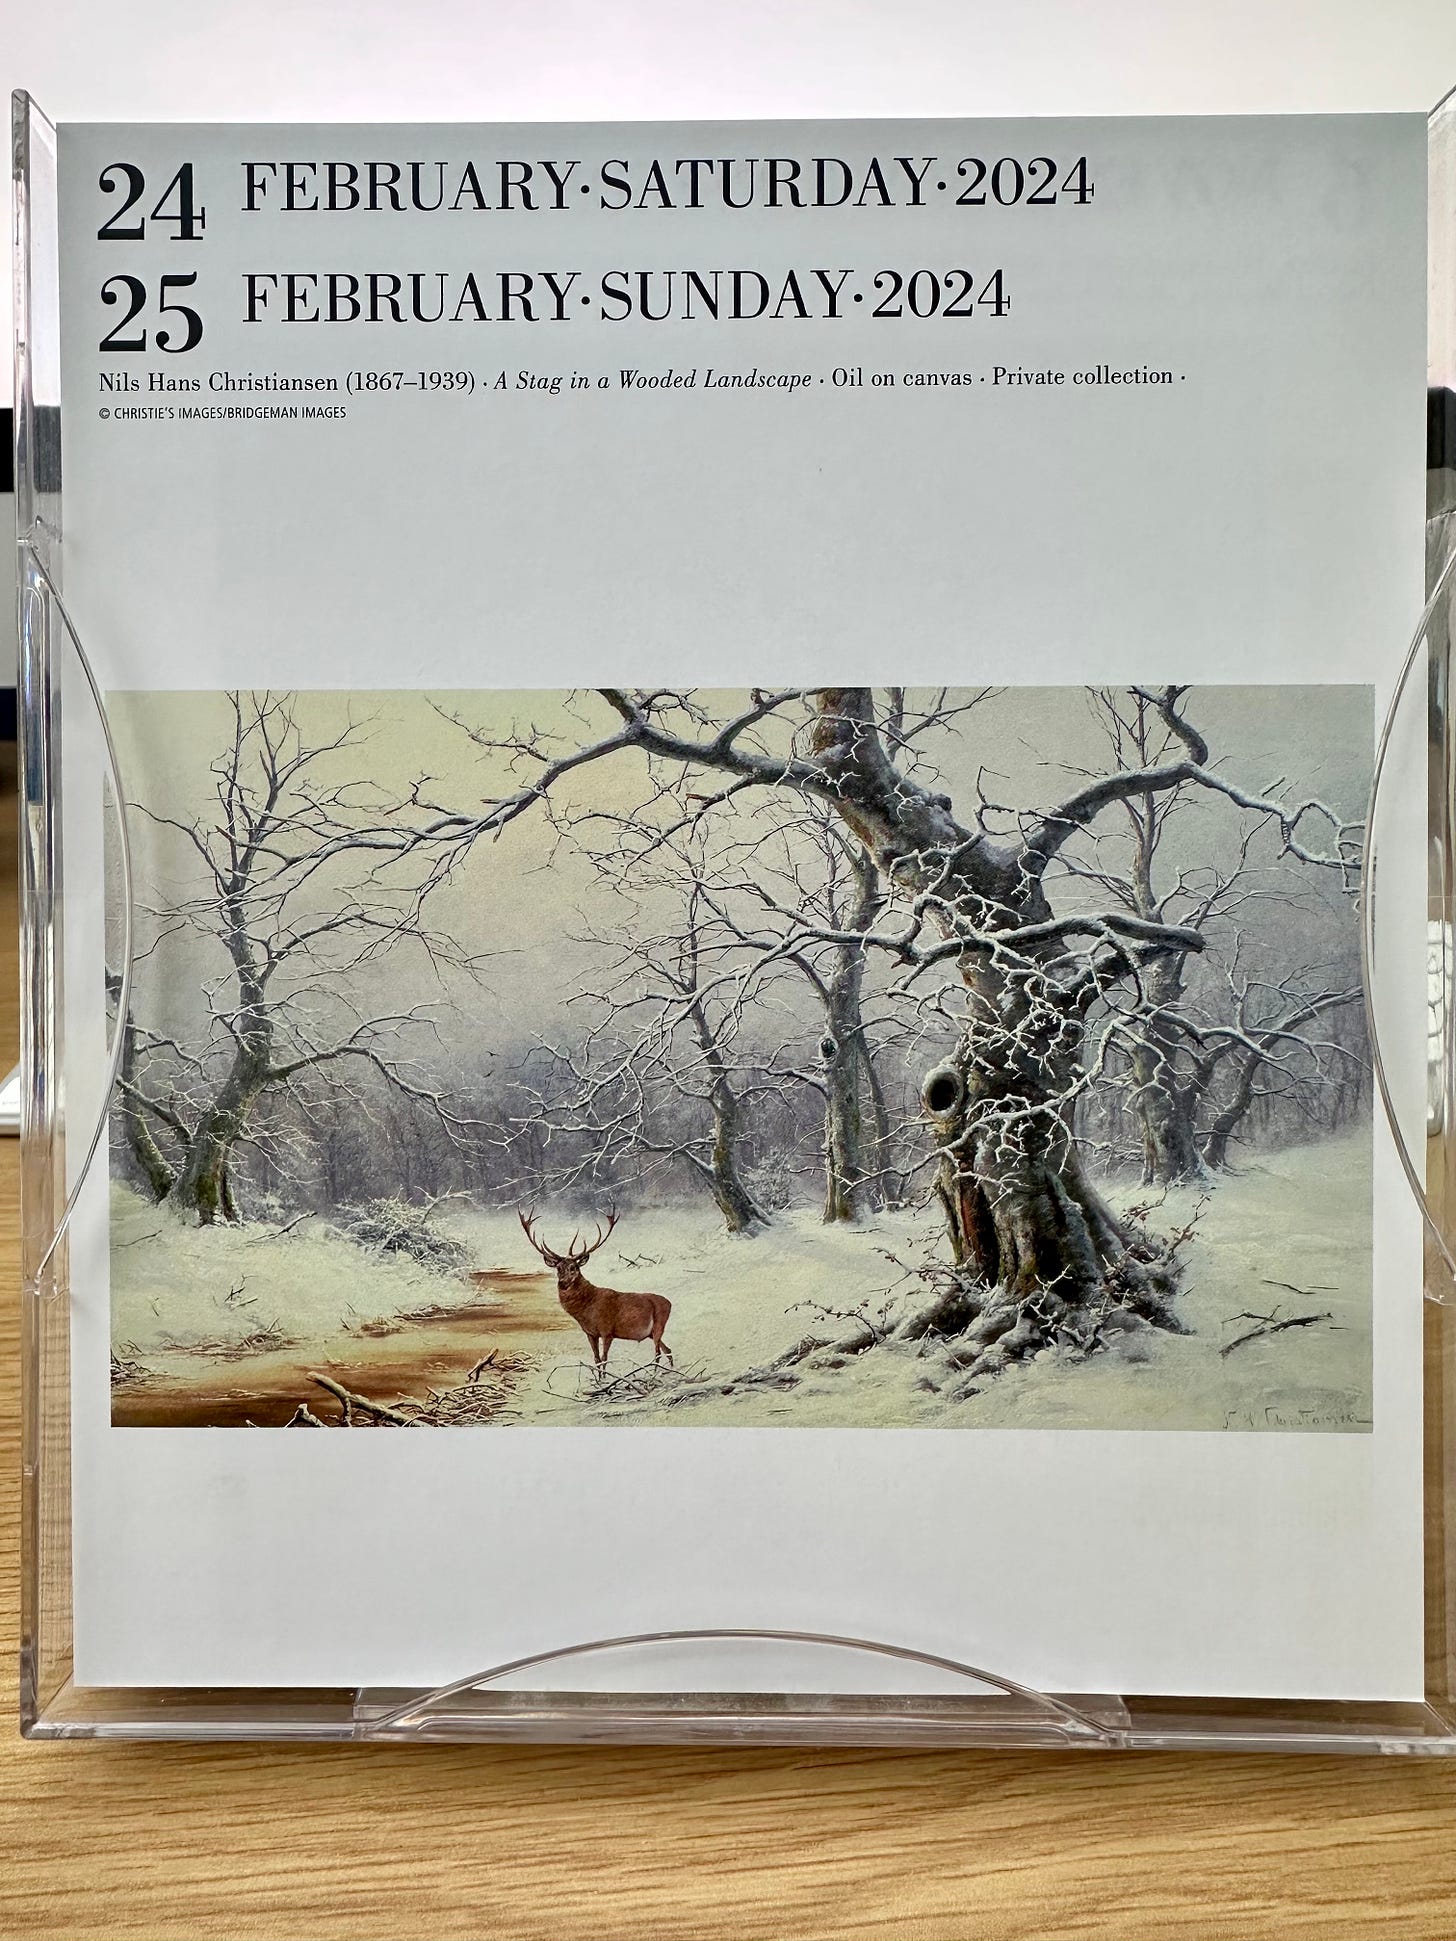 Image shows a painting of a stag in a snowy wood